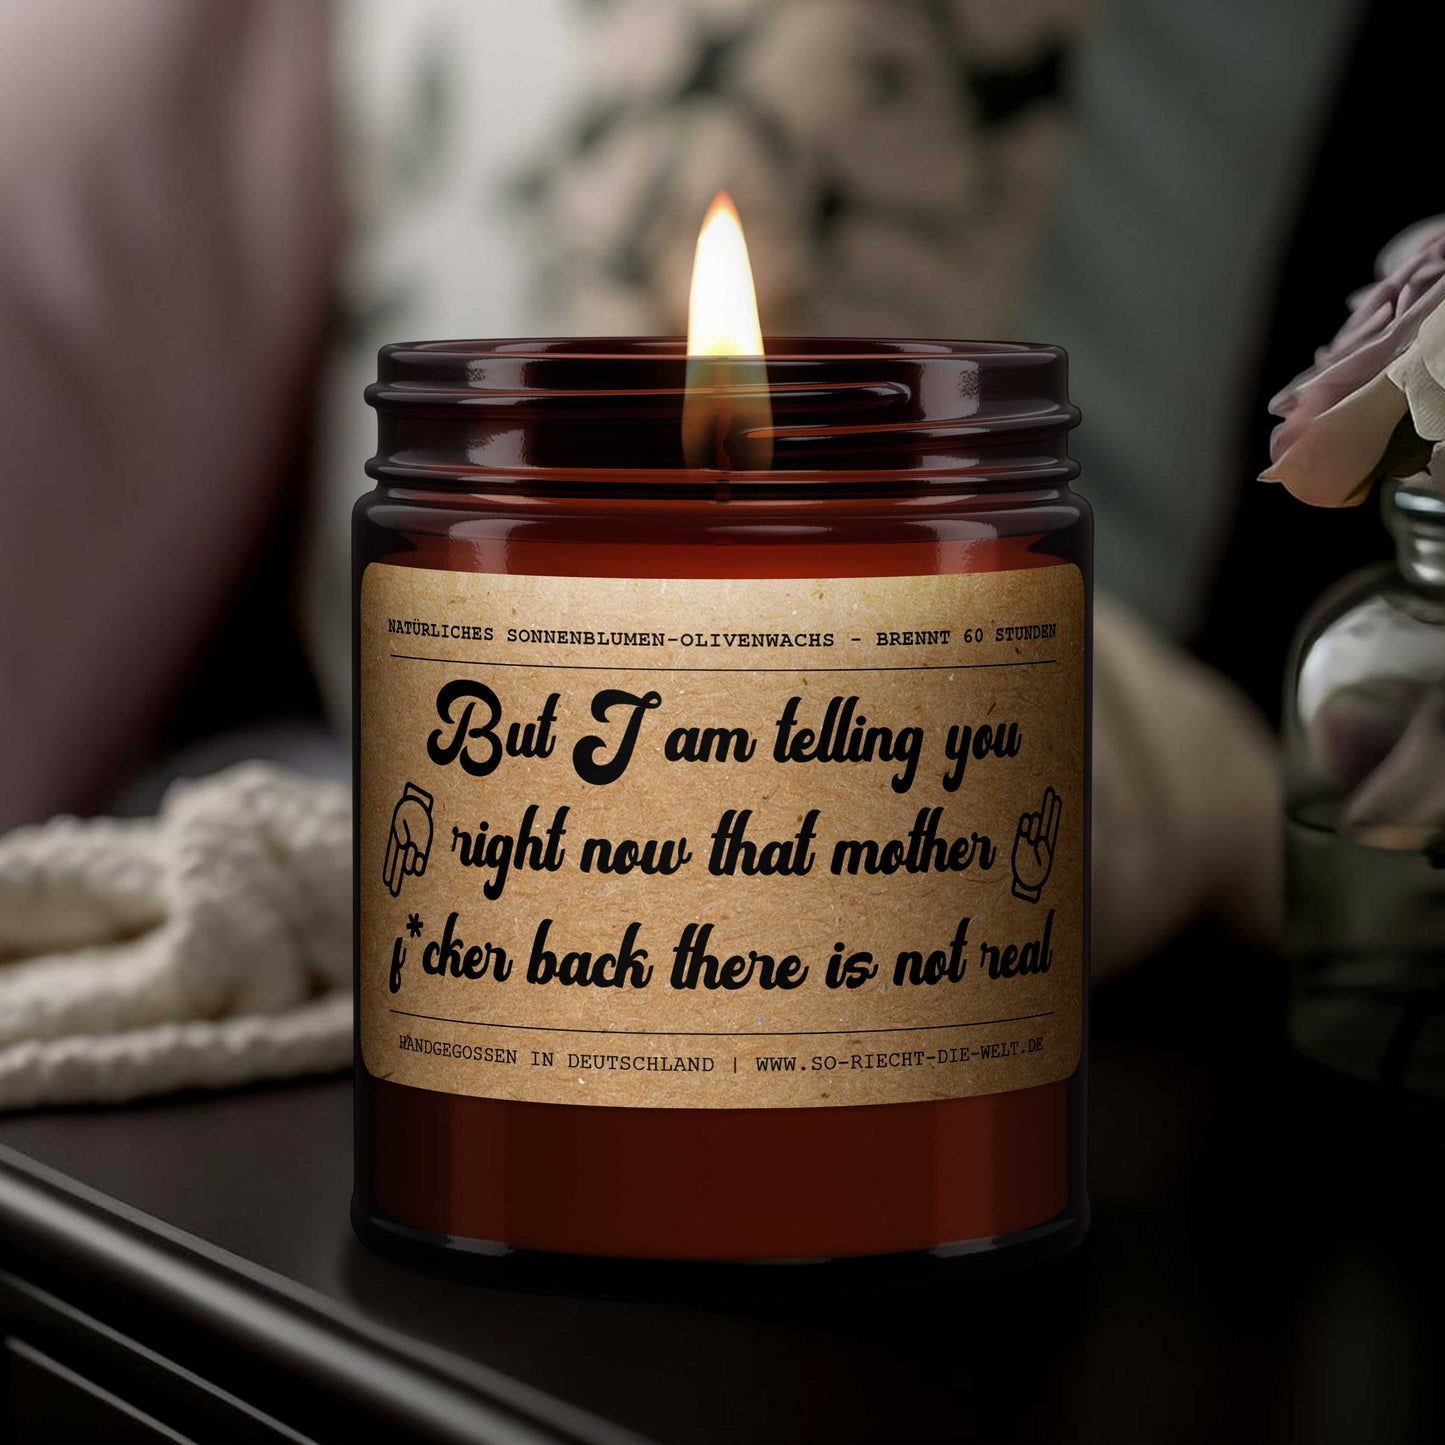 But I am telling you right now that mother f*cker back there is not real - candle, plane lady, scented candle, #fyp #trending #fy #fake #real #meme #og #fypシ #foryou #xyzbca #zyxbca #creepy #plane #joke